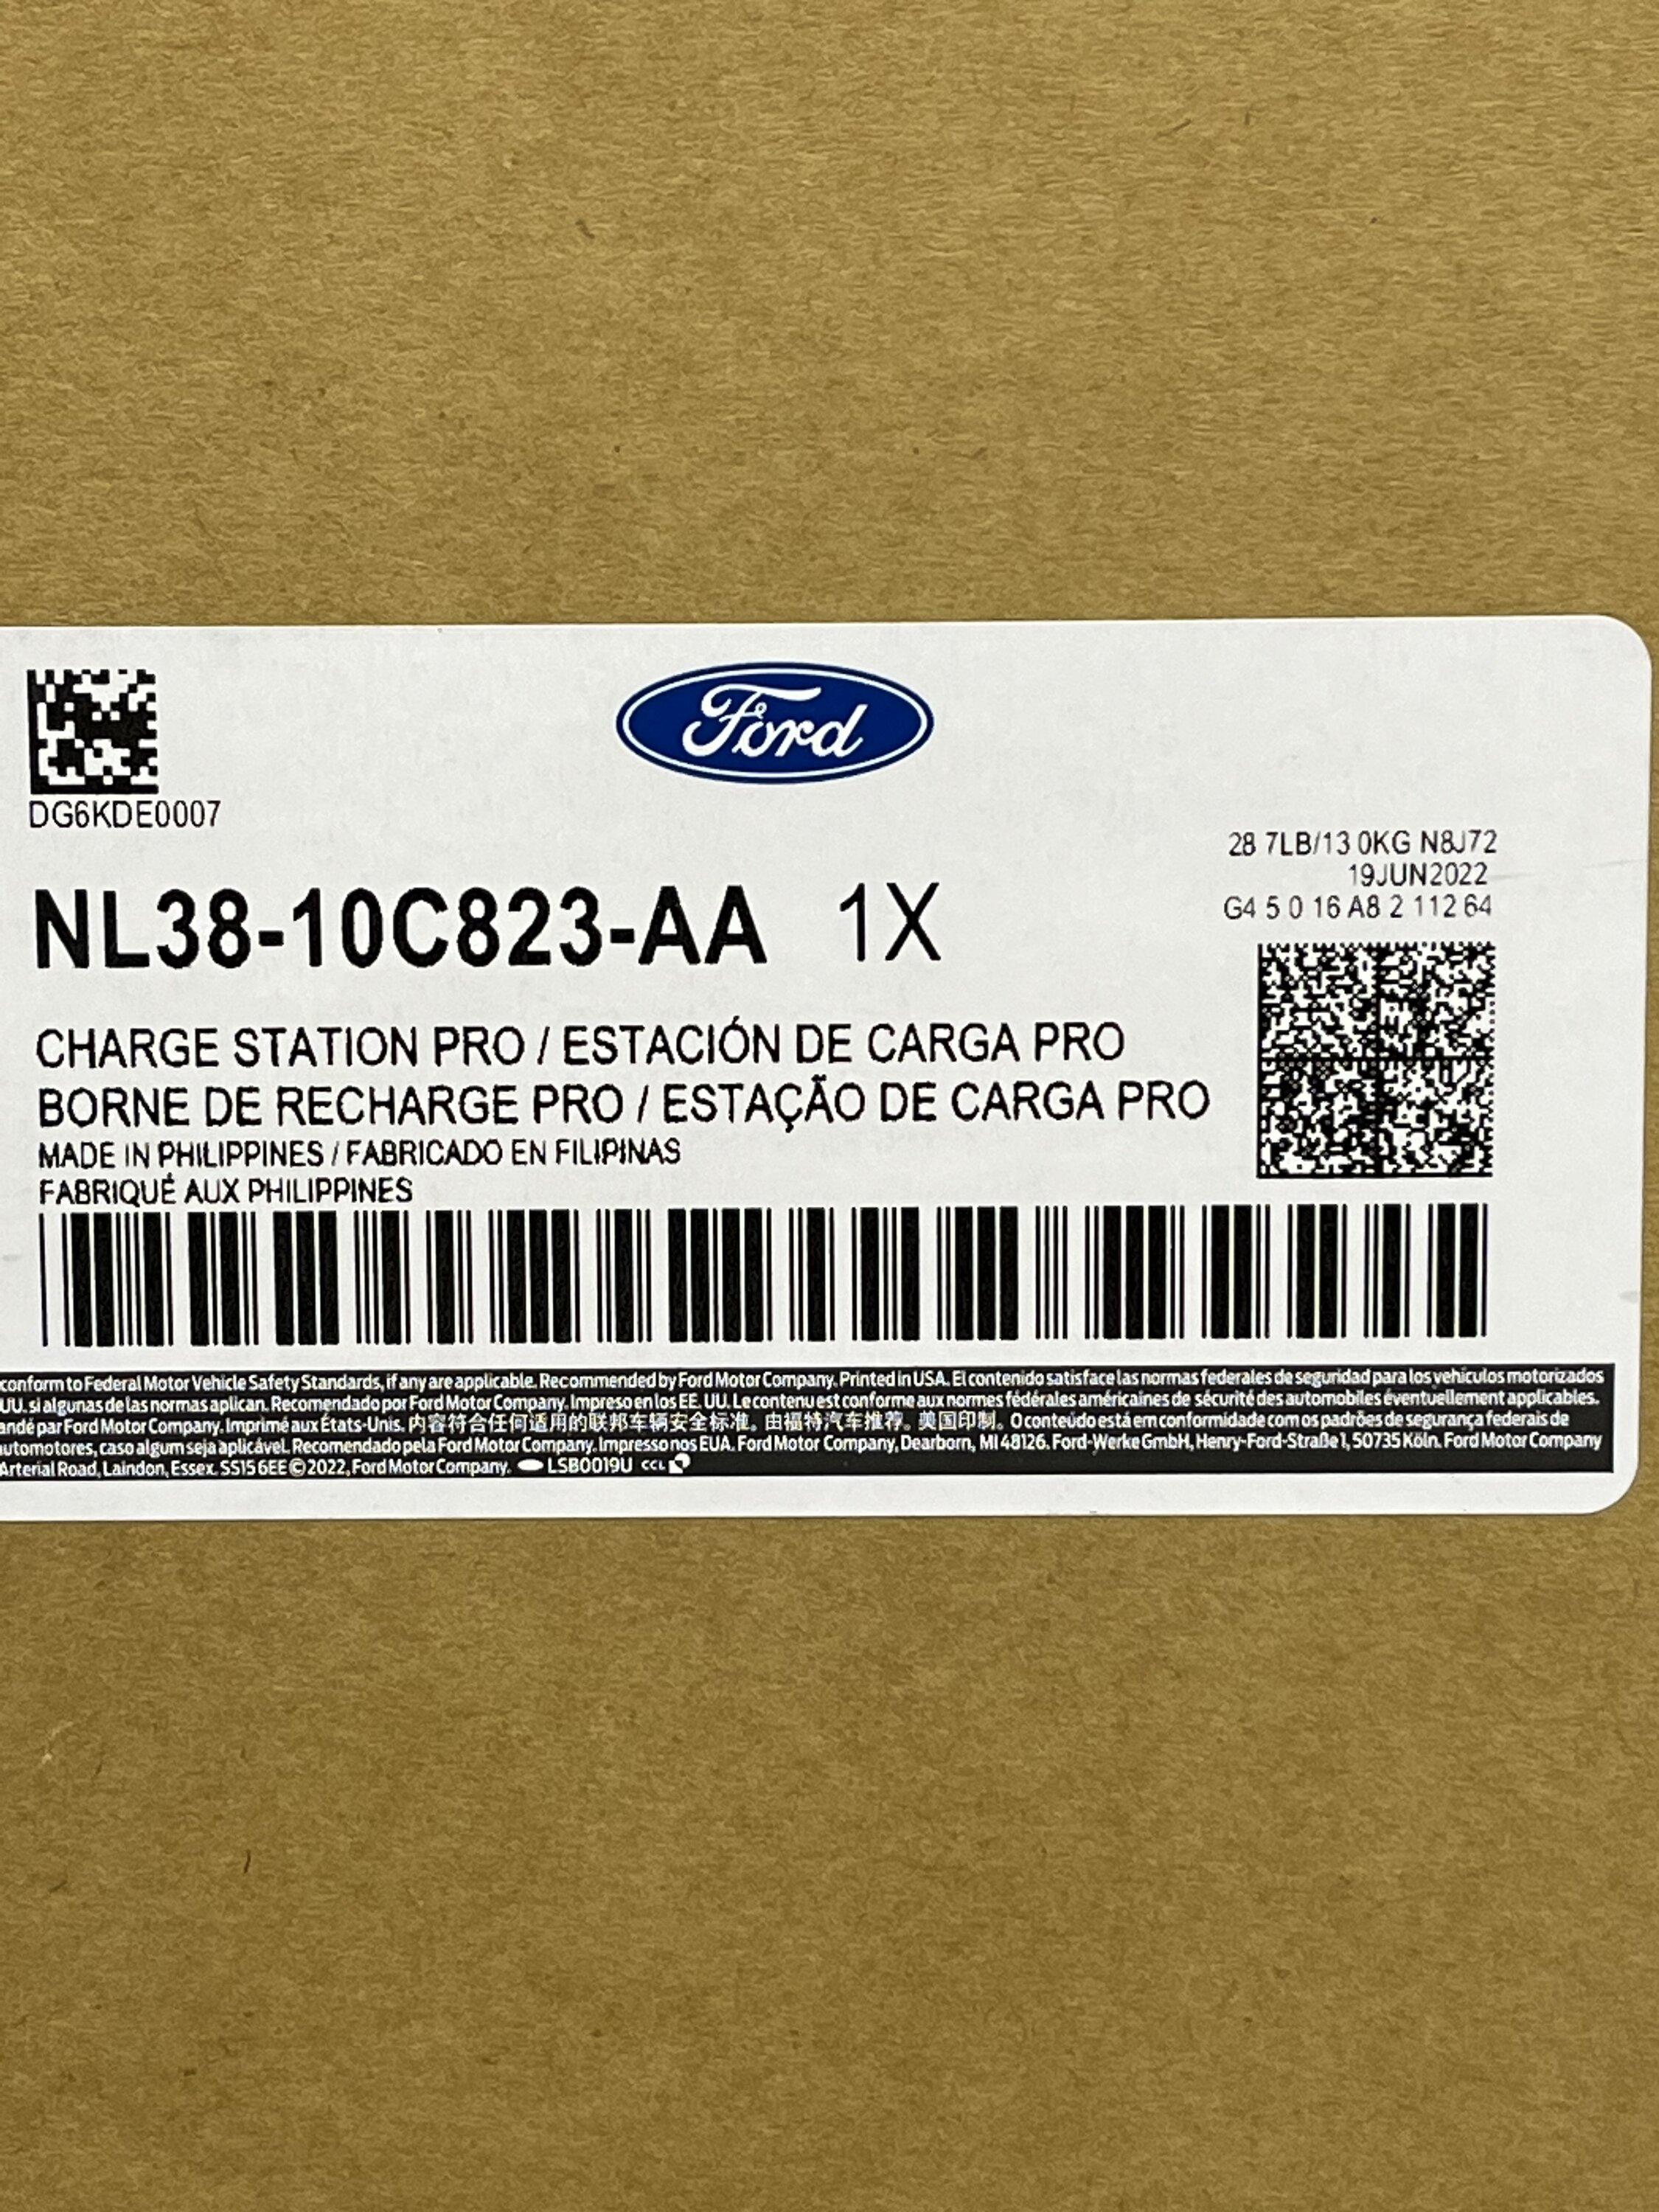 Ford F-150 Lightning Charge Station Pro Charger, New in box. Portland/Hillsboro $900 99BA196A-412F-4089-AC90-AE0F6856D8F2